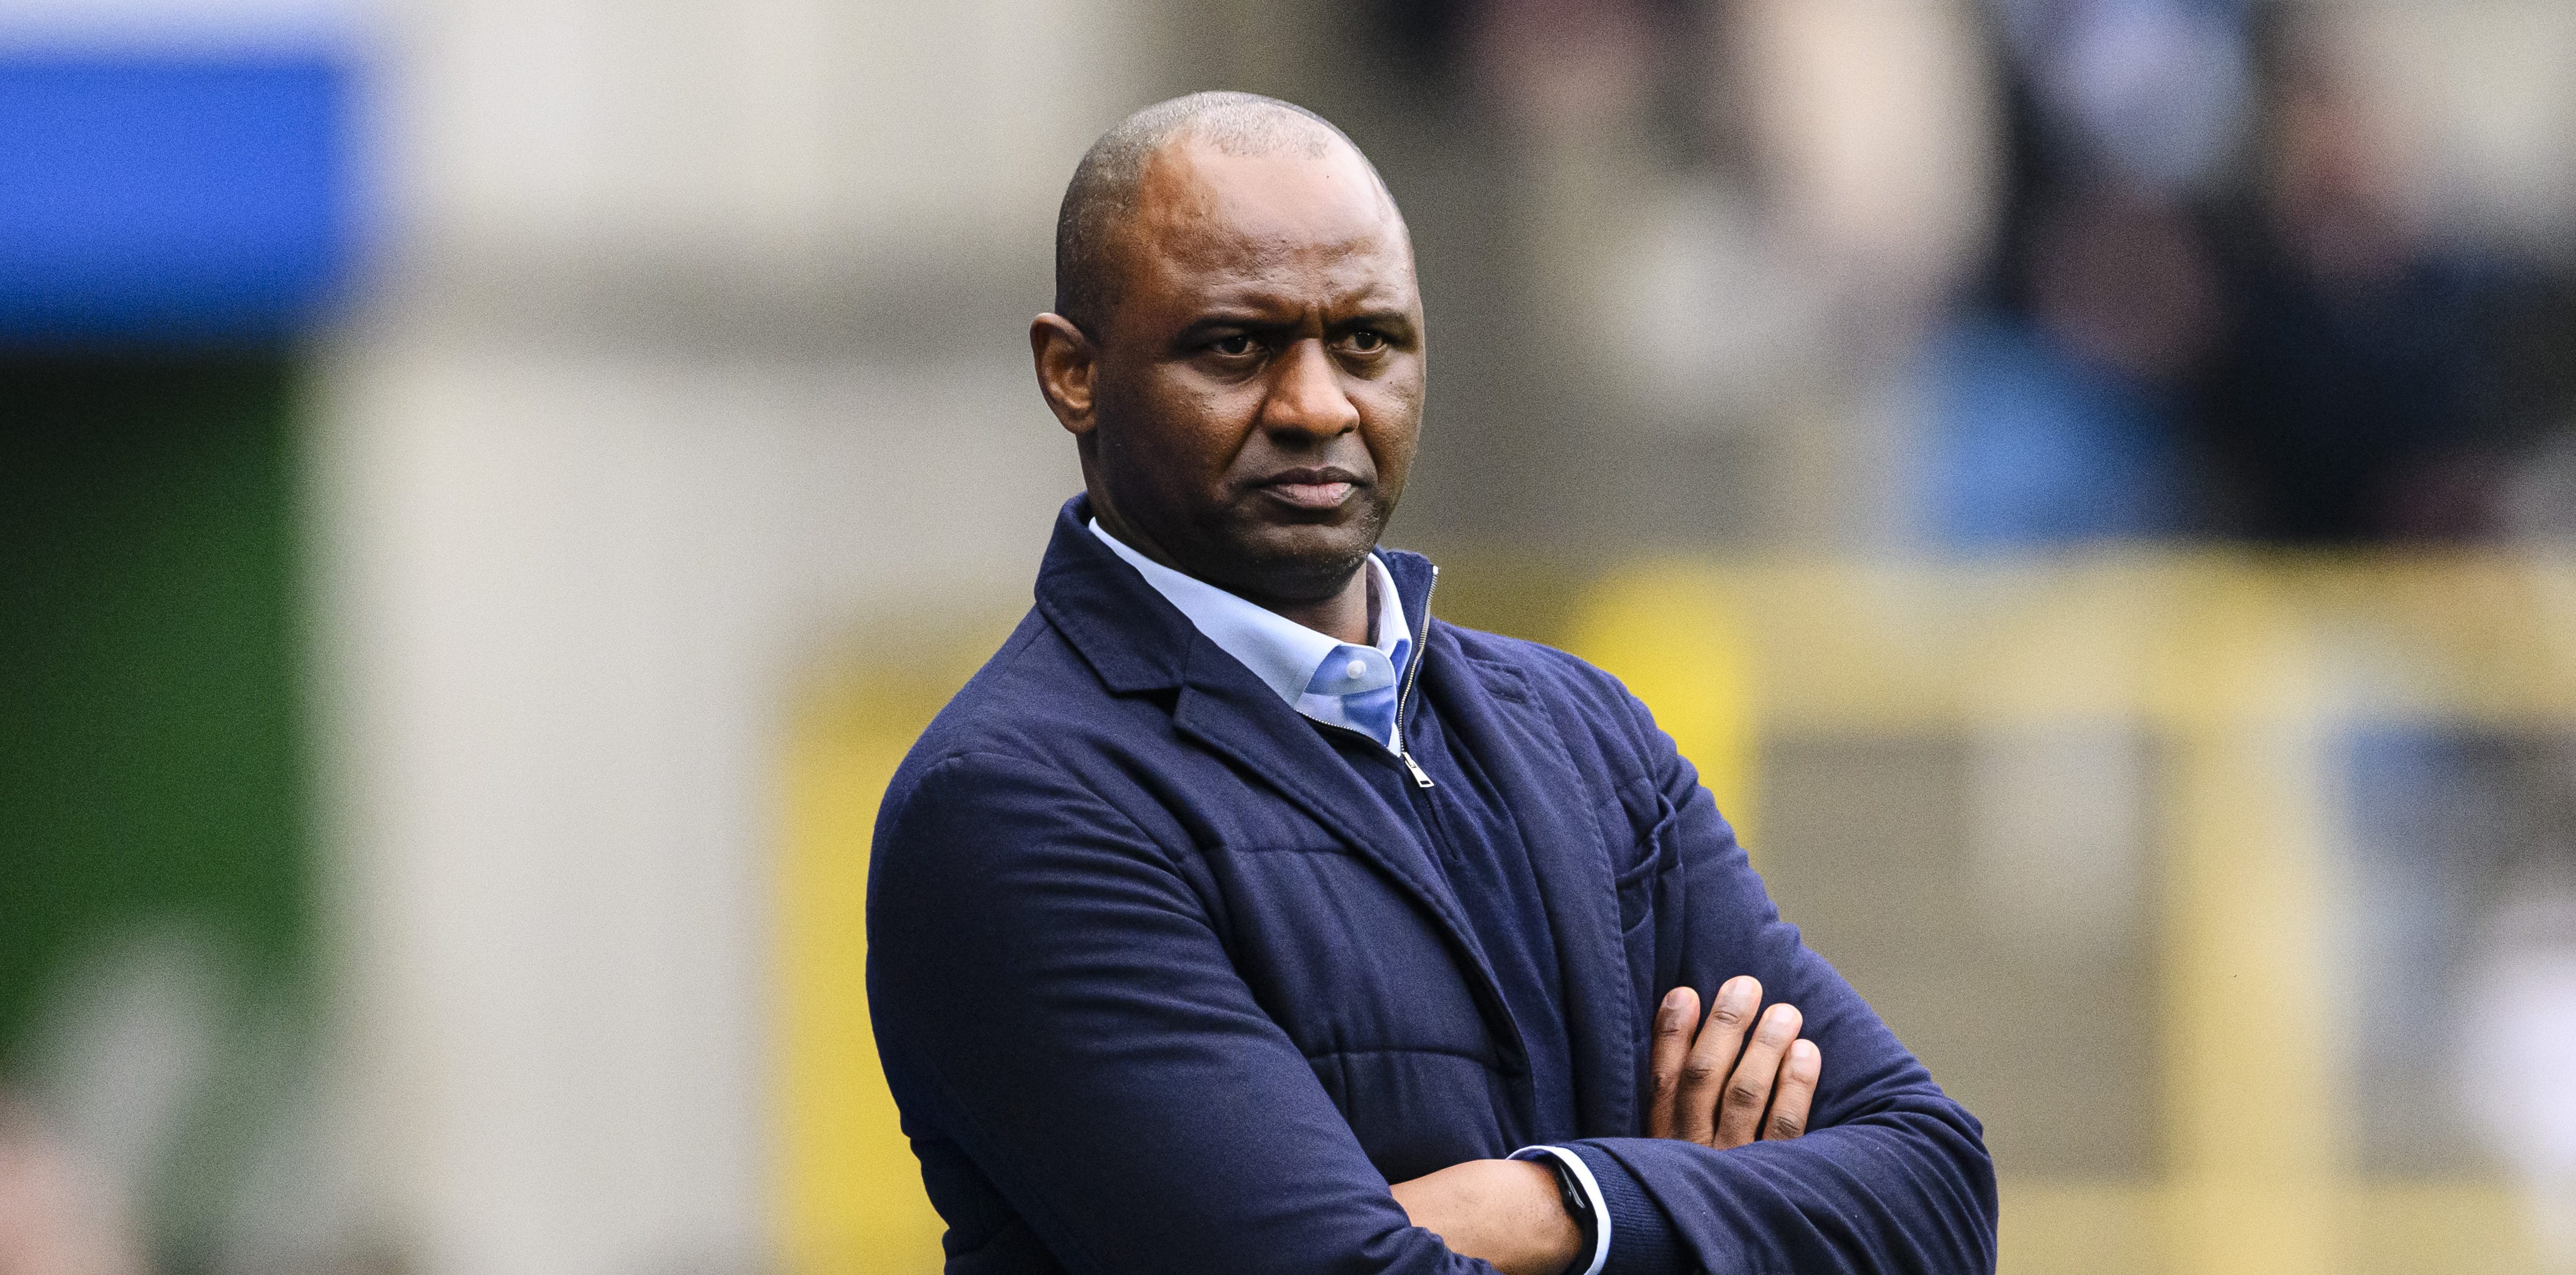 Patrick Vieira a candidate for USMNT head coach, report says